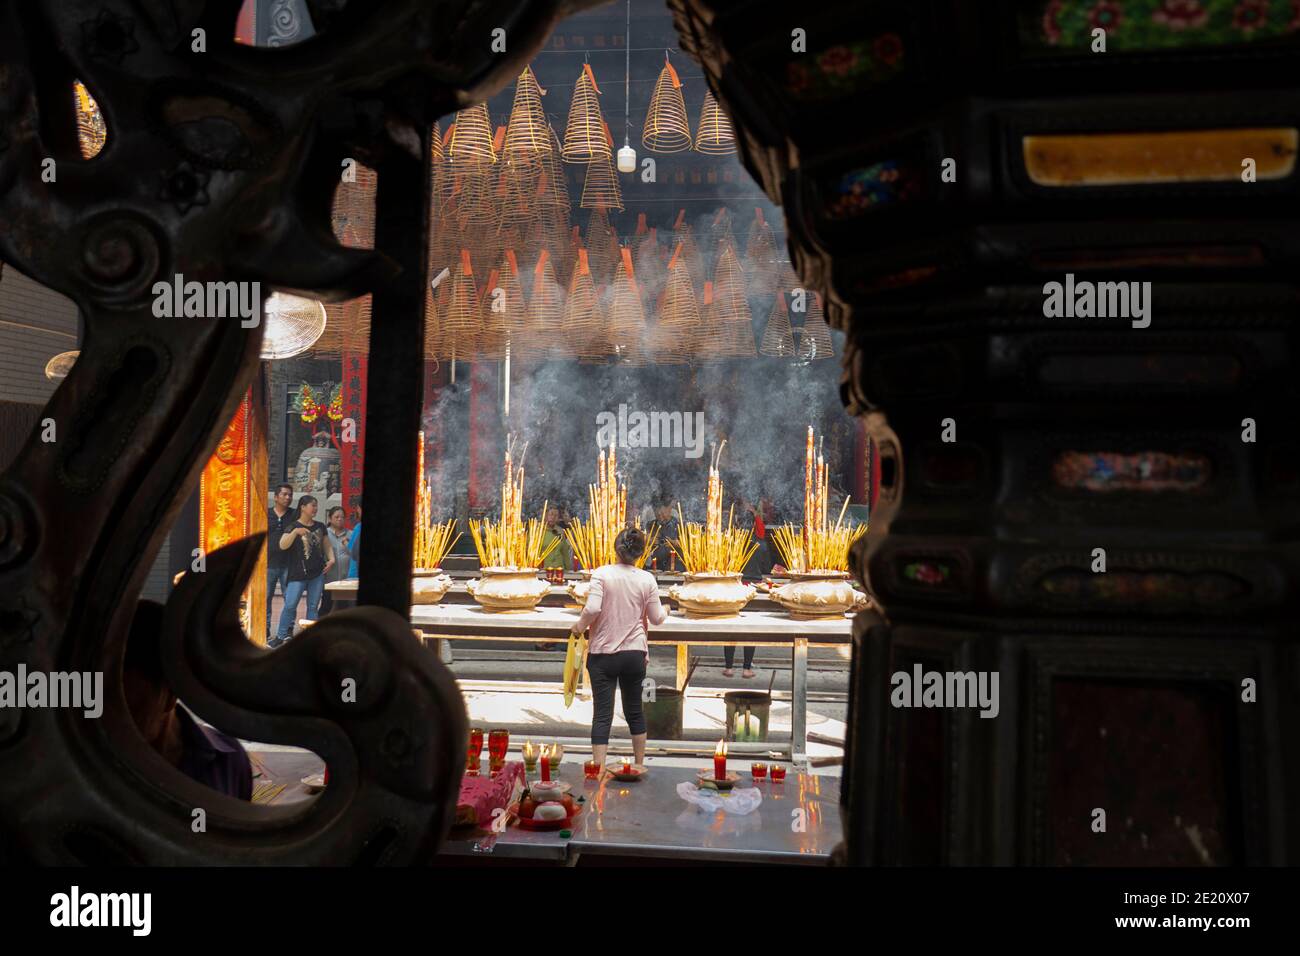 Incense burning in large pots in a Buddhist temple in Vietnam Stock Photo